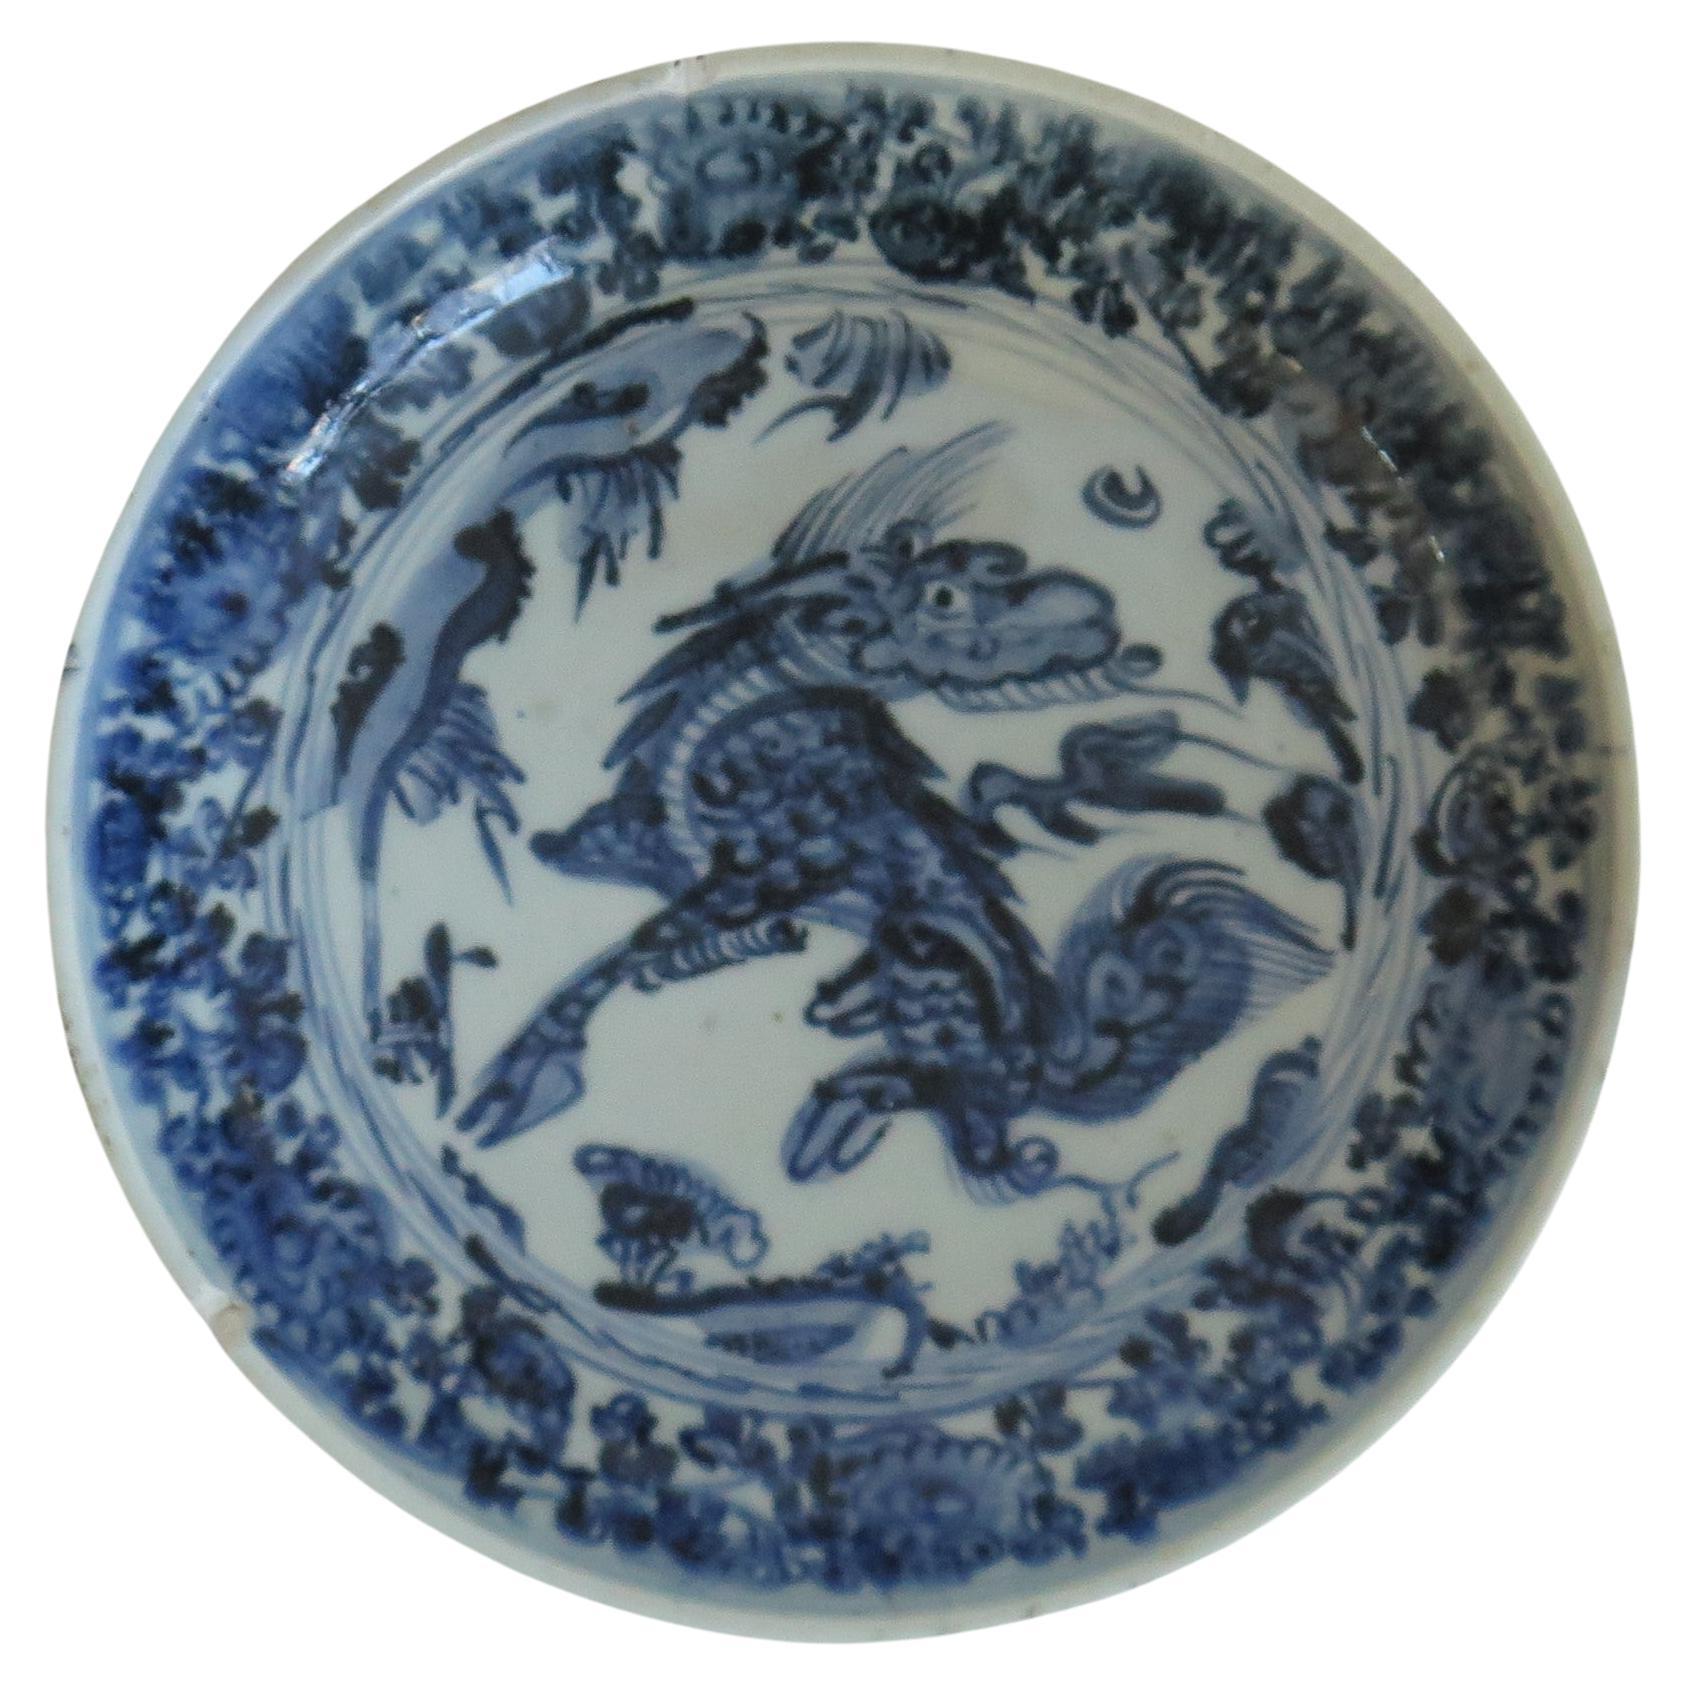 This is a Chinese Export porcelain Dish or Deep Plate hand painted in a typical Blue and white pattern, made during the reign of Wanli (1573 to 1620).

The dish is fairly heavily potted on a low foot and a well cut foot rim. The glaze is fairly